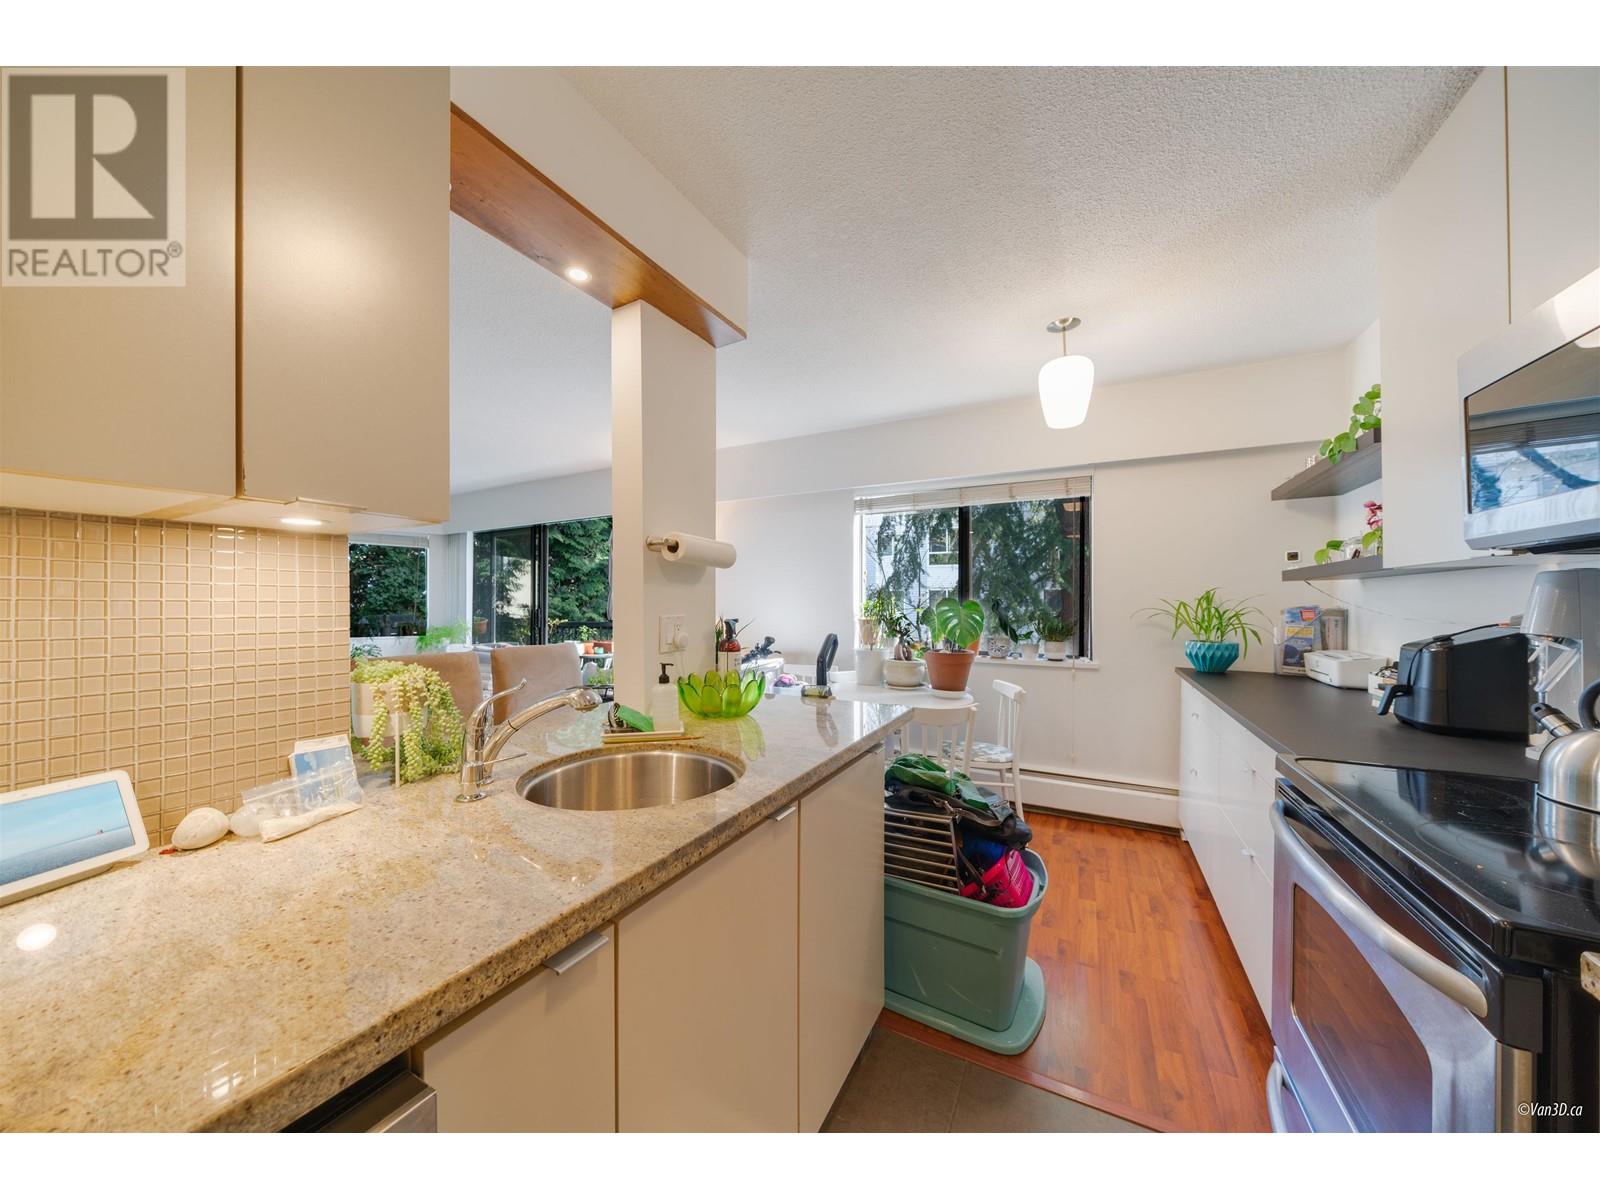 Listing Picture 4 of 17 : 207 2330 MAPLE STREET, Vancouver / 溫哥華 - 魯藝地產 Yvonne Lu Group - MLS Medallion Club Member